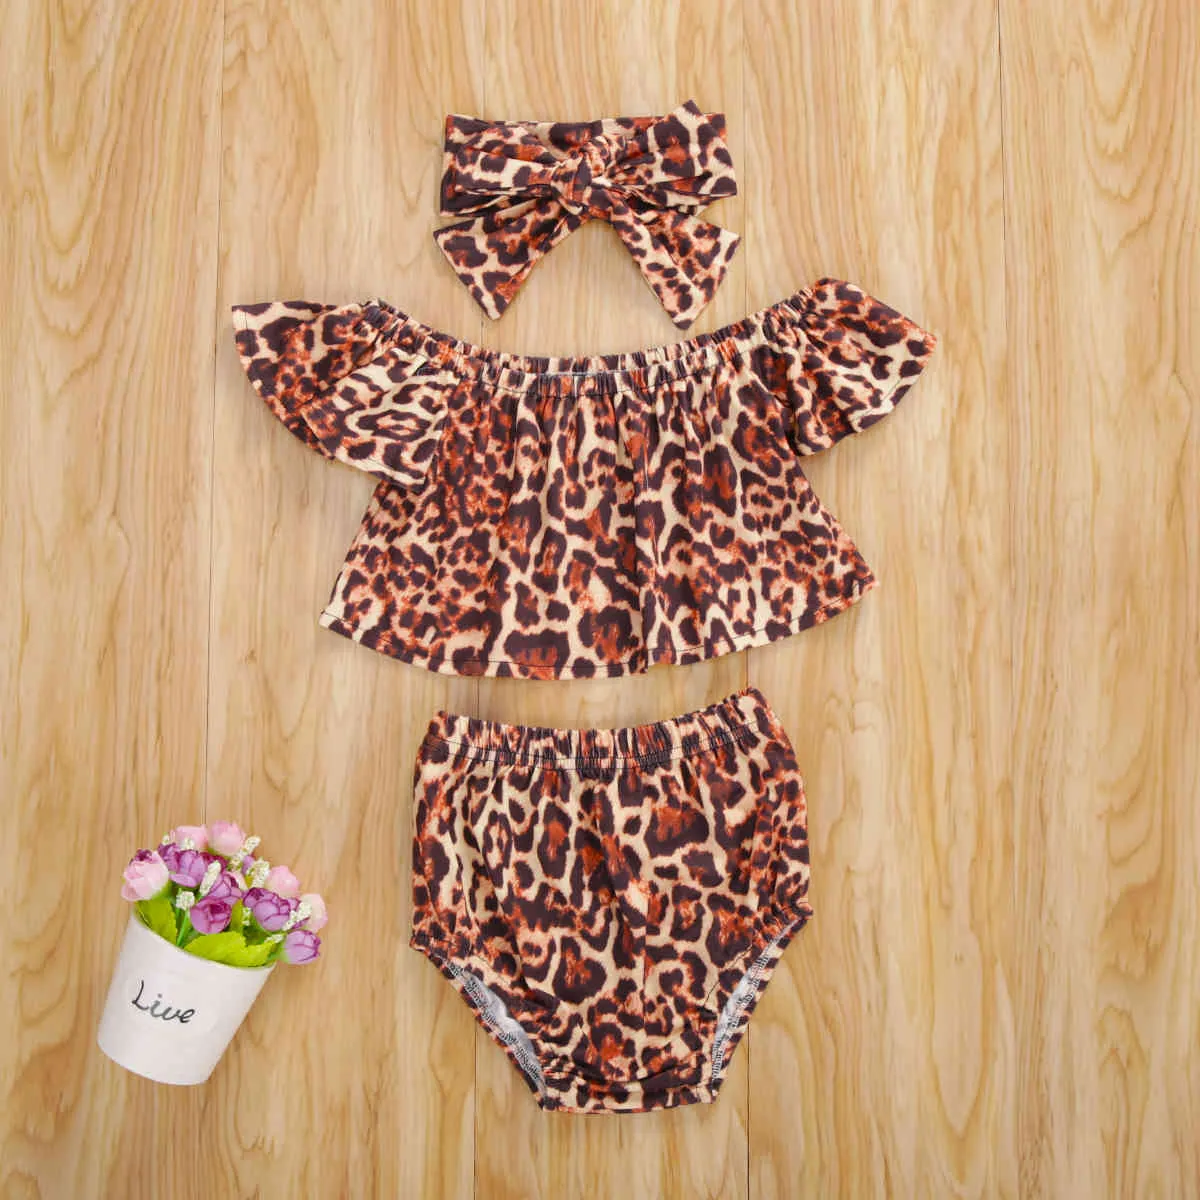 6m-4Y Toddler born Infant Baby Kid Girls Clothes Set Leopard Ruffles Off Shoulder T shirt Shorts Outfit Summer 210515